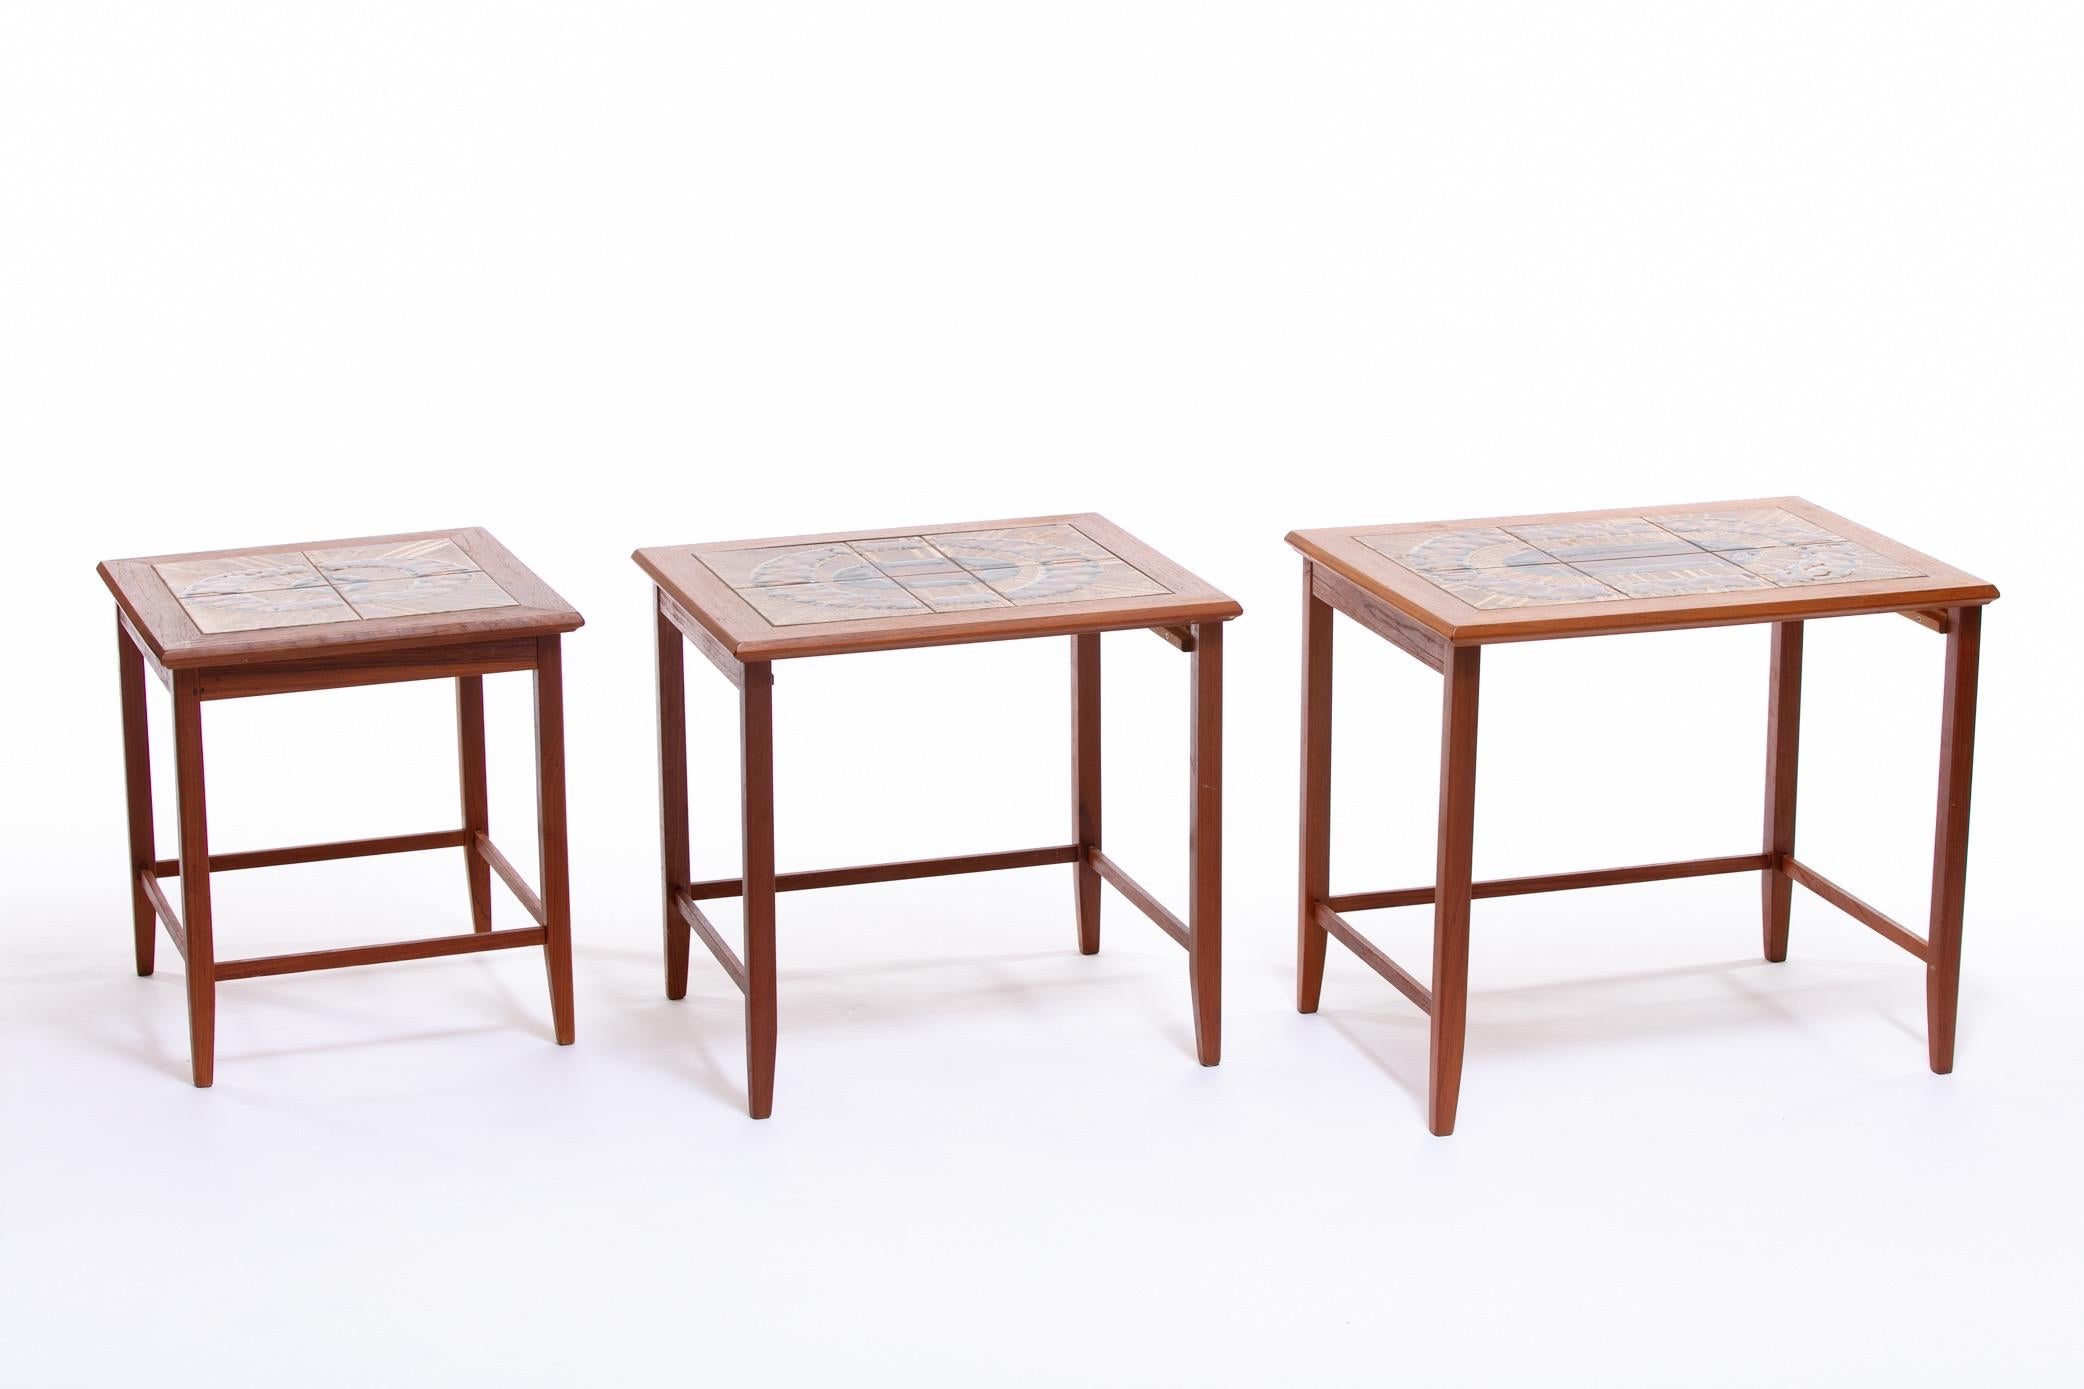 Danish Modern Teak & Painted Ceramic Tile Stacking Tables by Toften Mobelfabrik In Good Condition In Saint Louis, MO